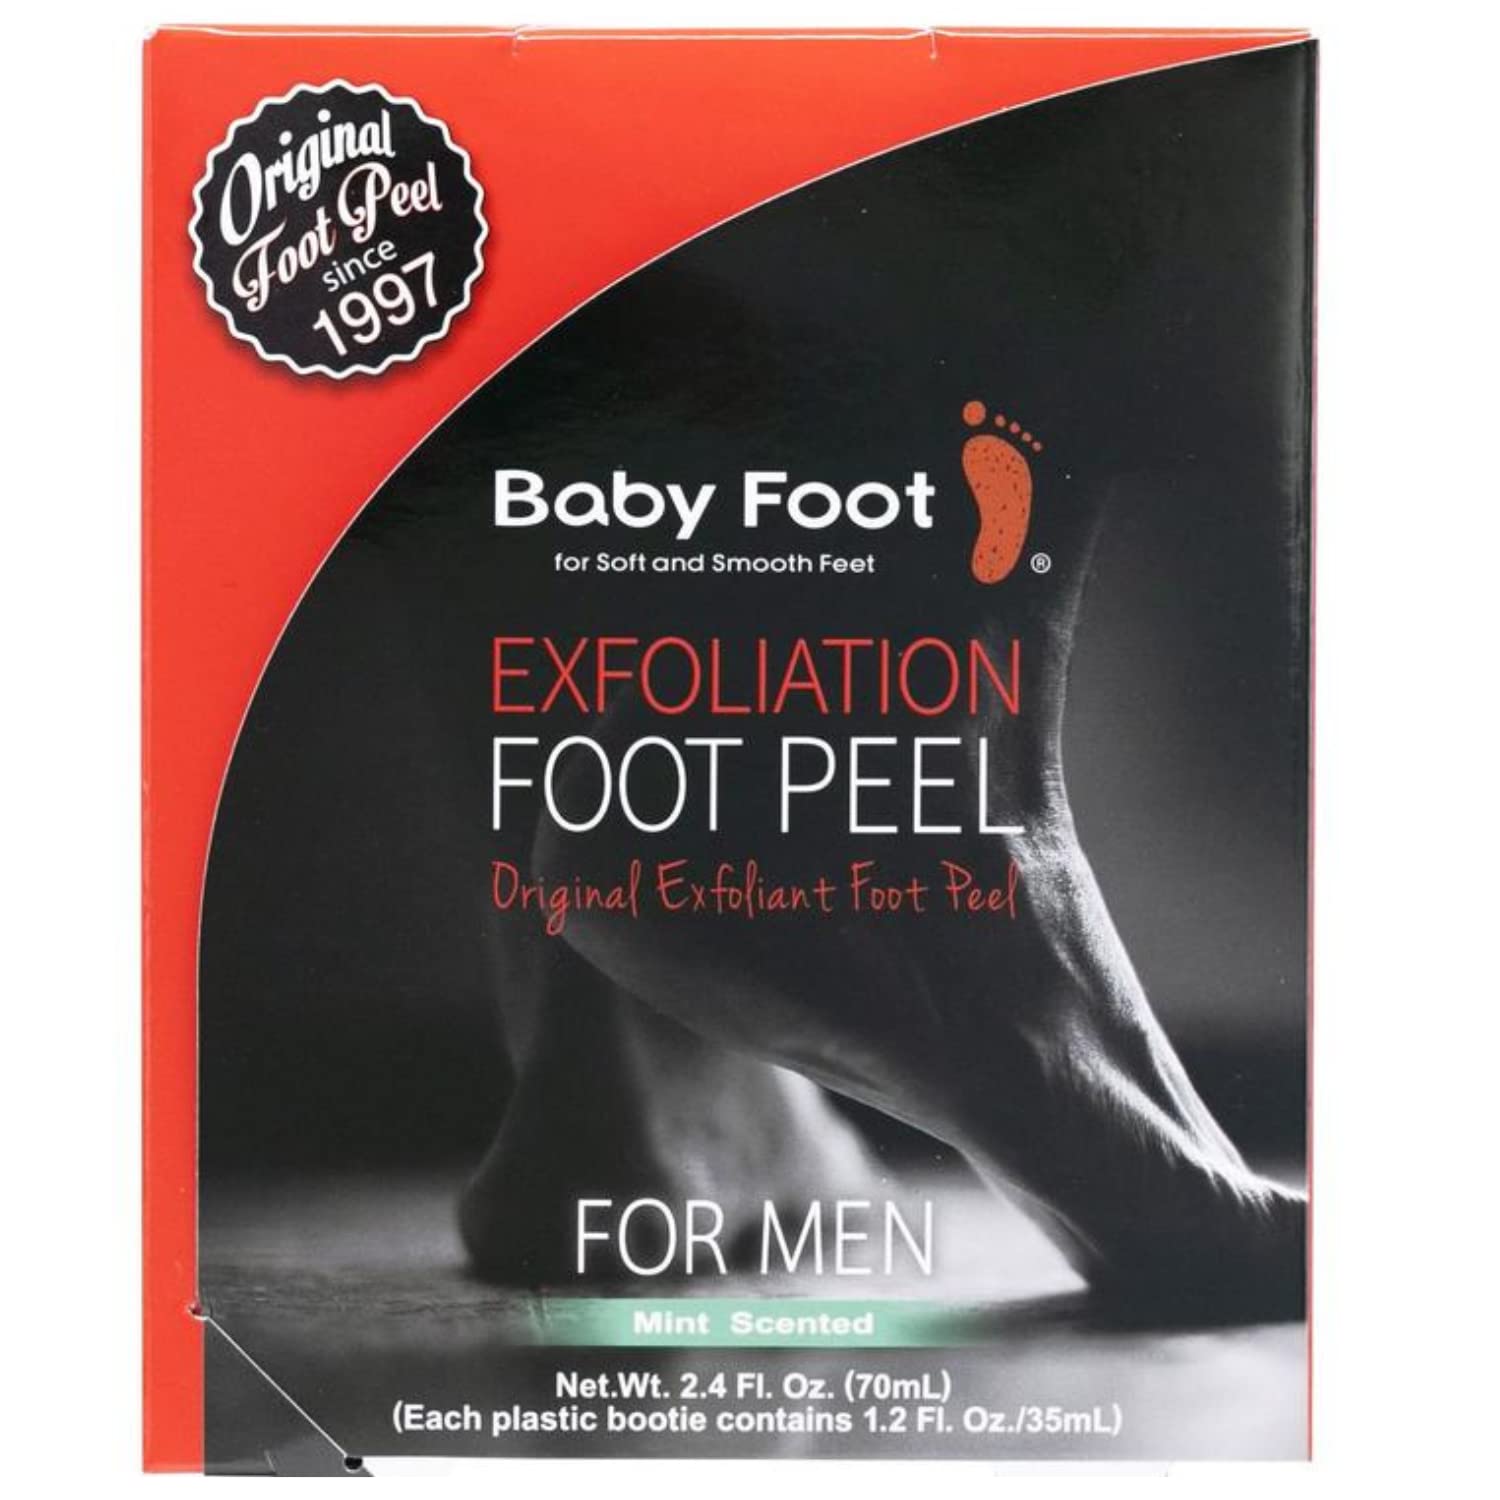 Baby Foot - Original Foot Peel Exfoliator For Men - Mint Scent Pair - Foot Peel Mask - Repair Rough Dry Cracked Feet and remove Dead Skin, Repair Heels and enjoy Baby Soft Smooth Feet 2.7 Fl. Oz. Mint Scented Pair